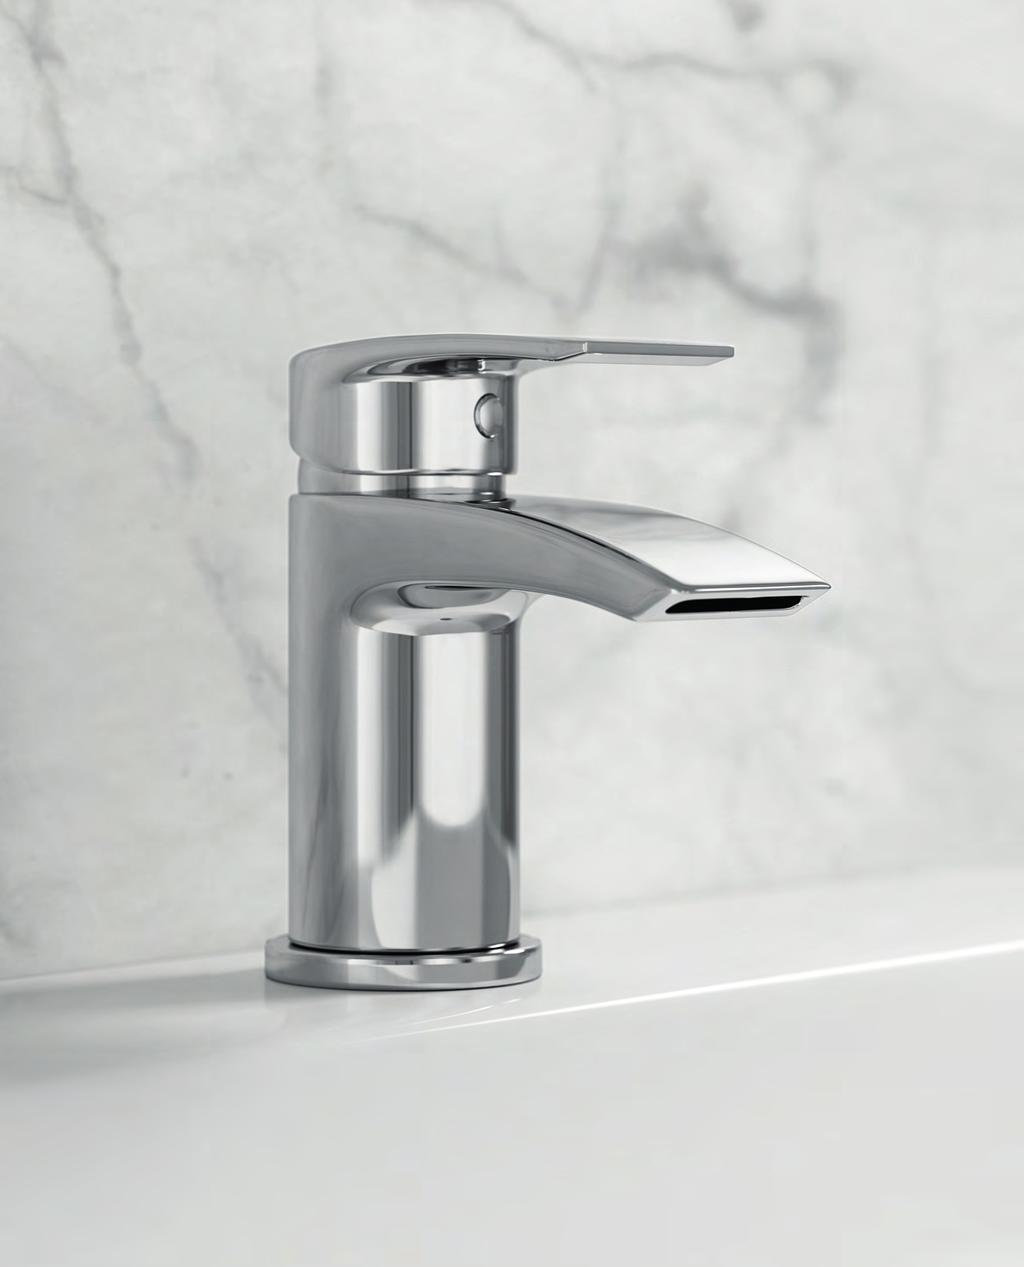 LENSO A beautiful range of single lever taps and mixers, featuring